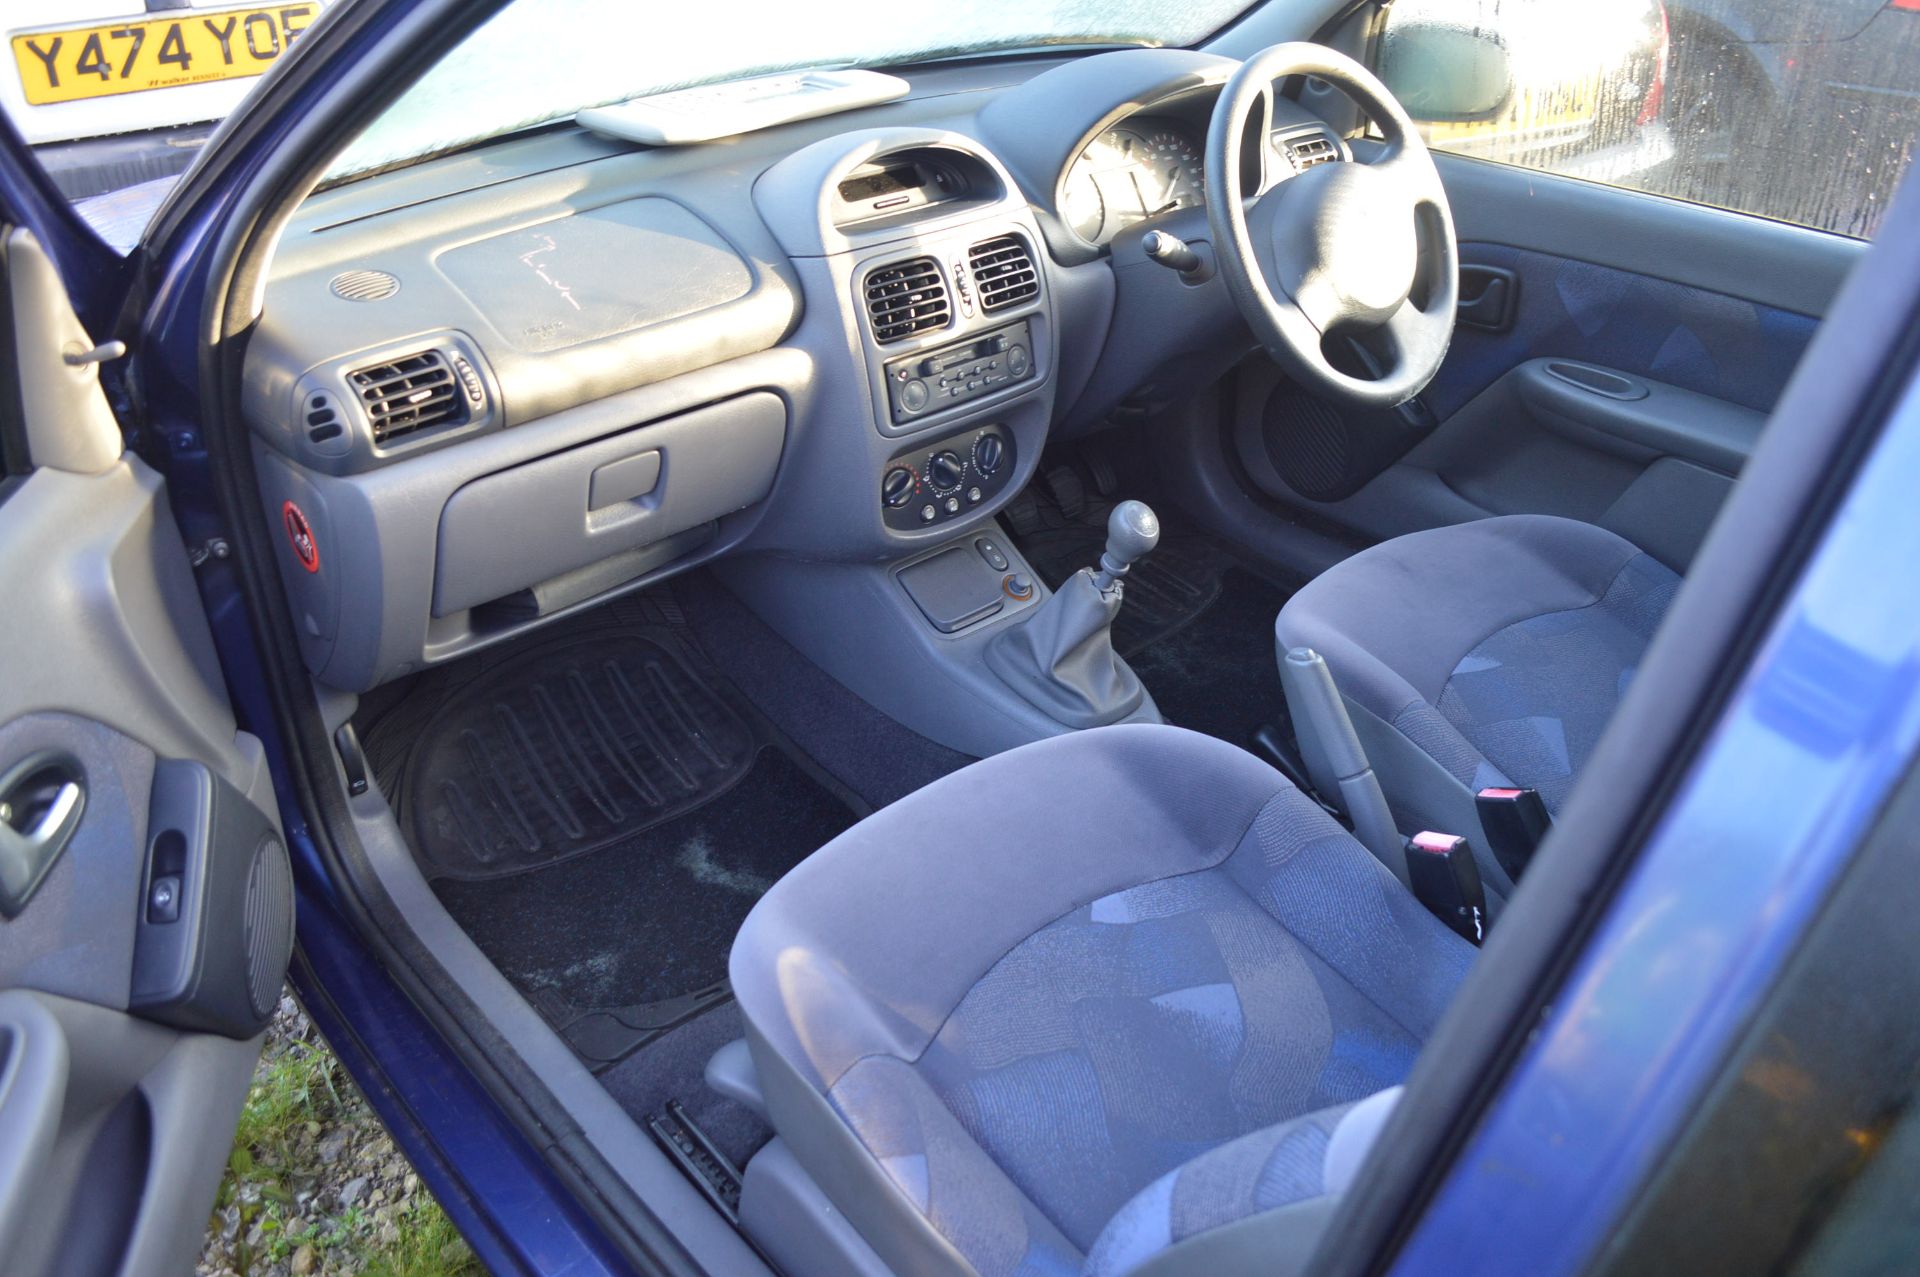 2000/X REG RENAULT CLIO ALIZE - SELLING AS SPARES / REPAIRS *NO VAT* - Image 6 of 9